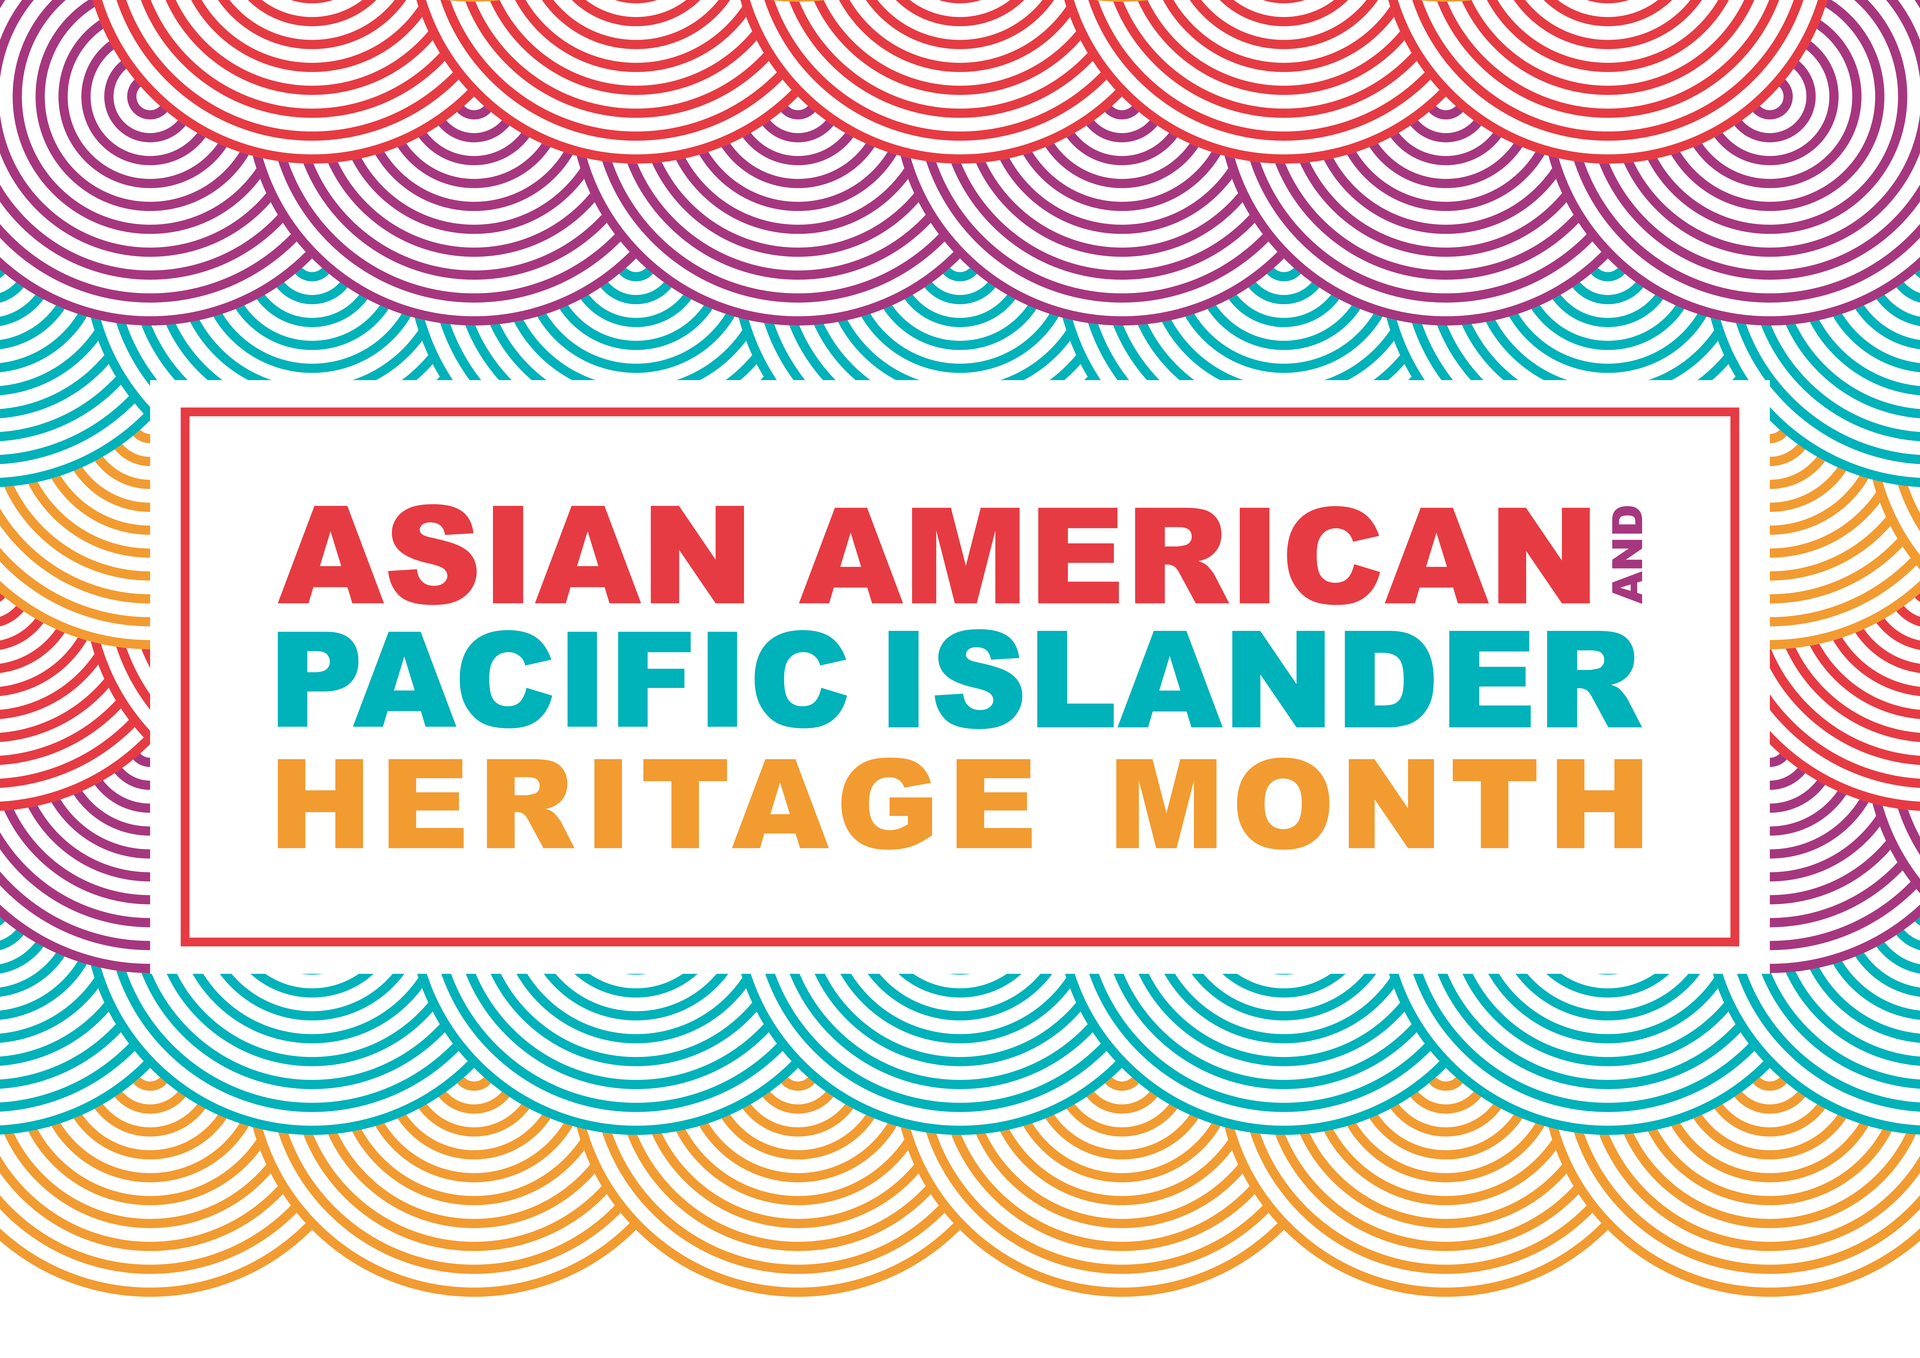 Orthofix Recognizes Asian American and Pacific Islander Heritage Month